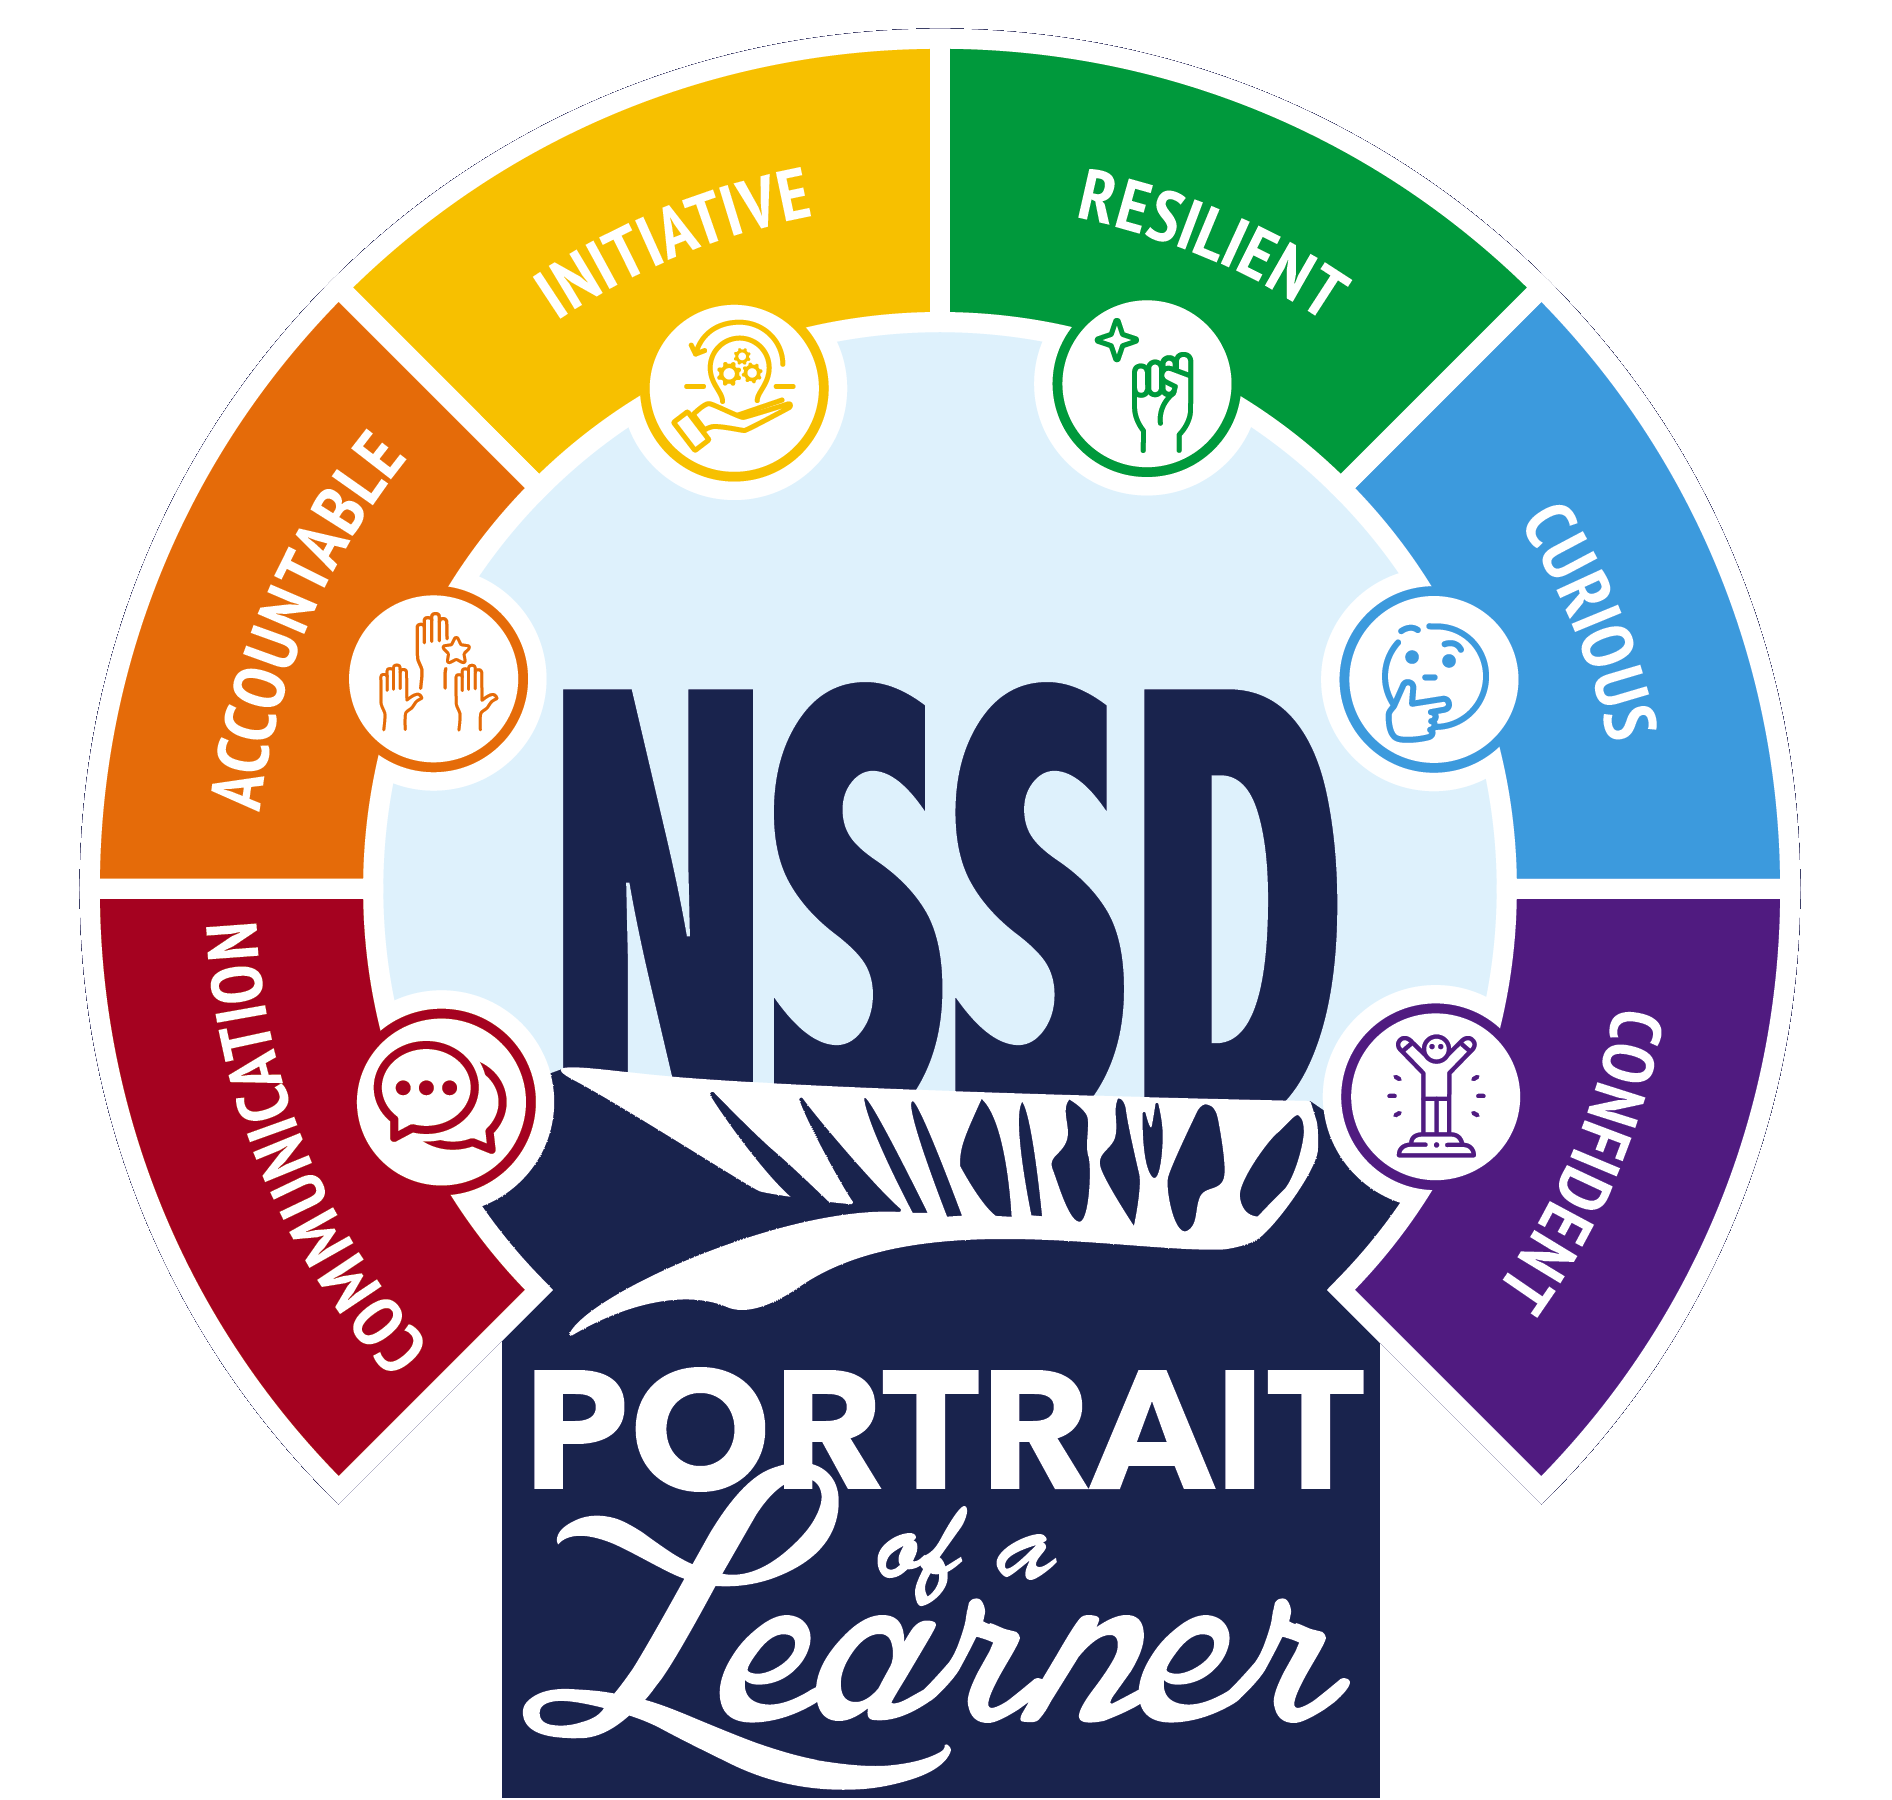 the nssd logo is a portrait of a learner .